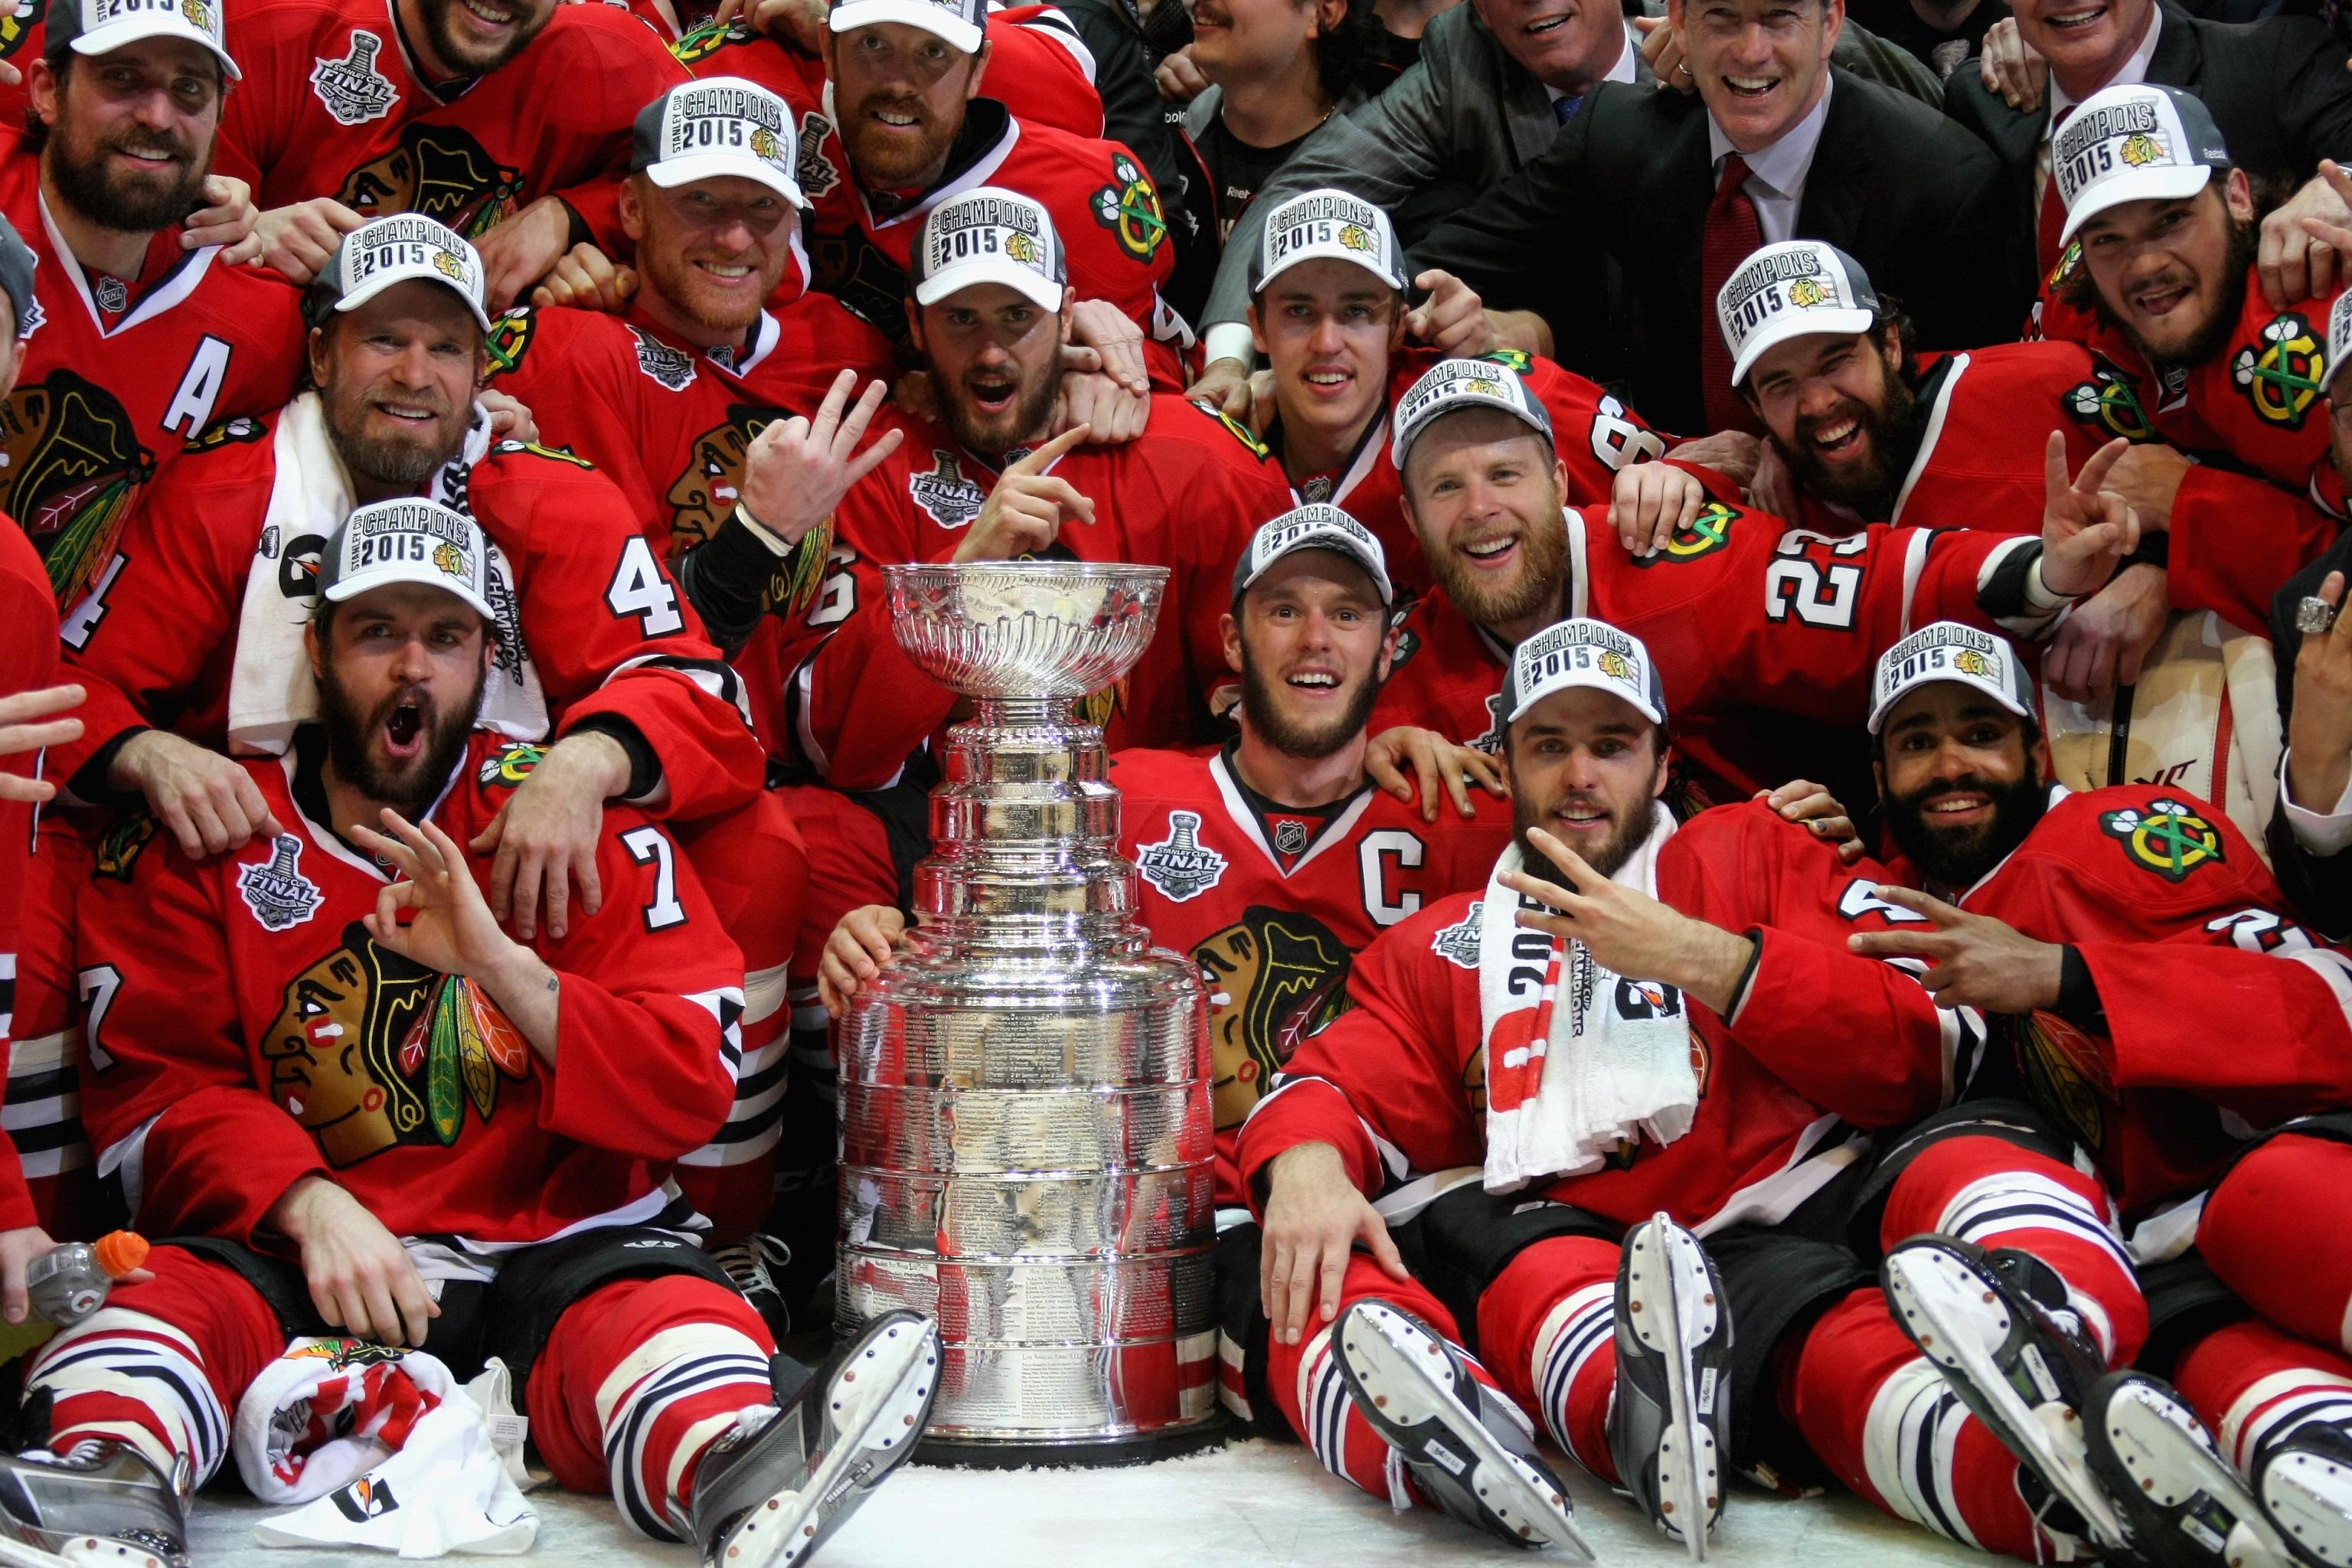 Hawks Dynasty: The Chicago Blackhawks' Run to the 2015 Stanley Cup